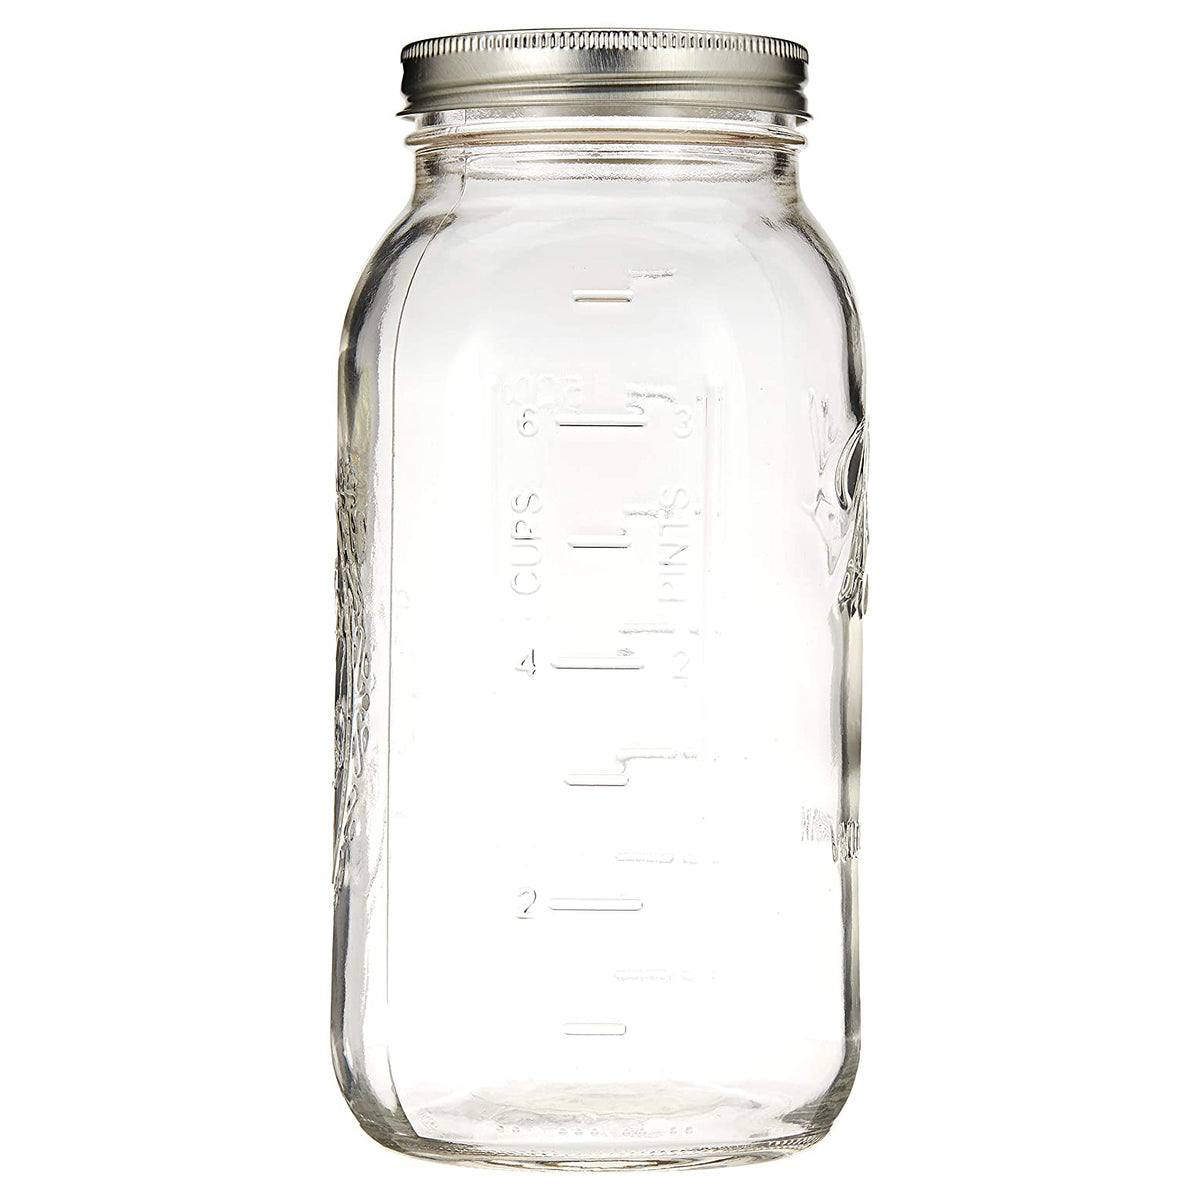 Ball 68100 Wide Mouth Glass Preserving Canning Mason Jars, 1/2-Gallon, 6-Count